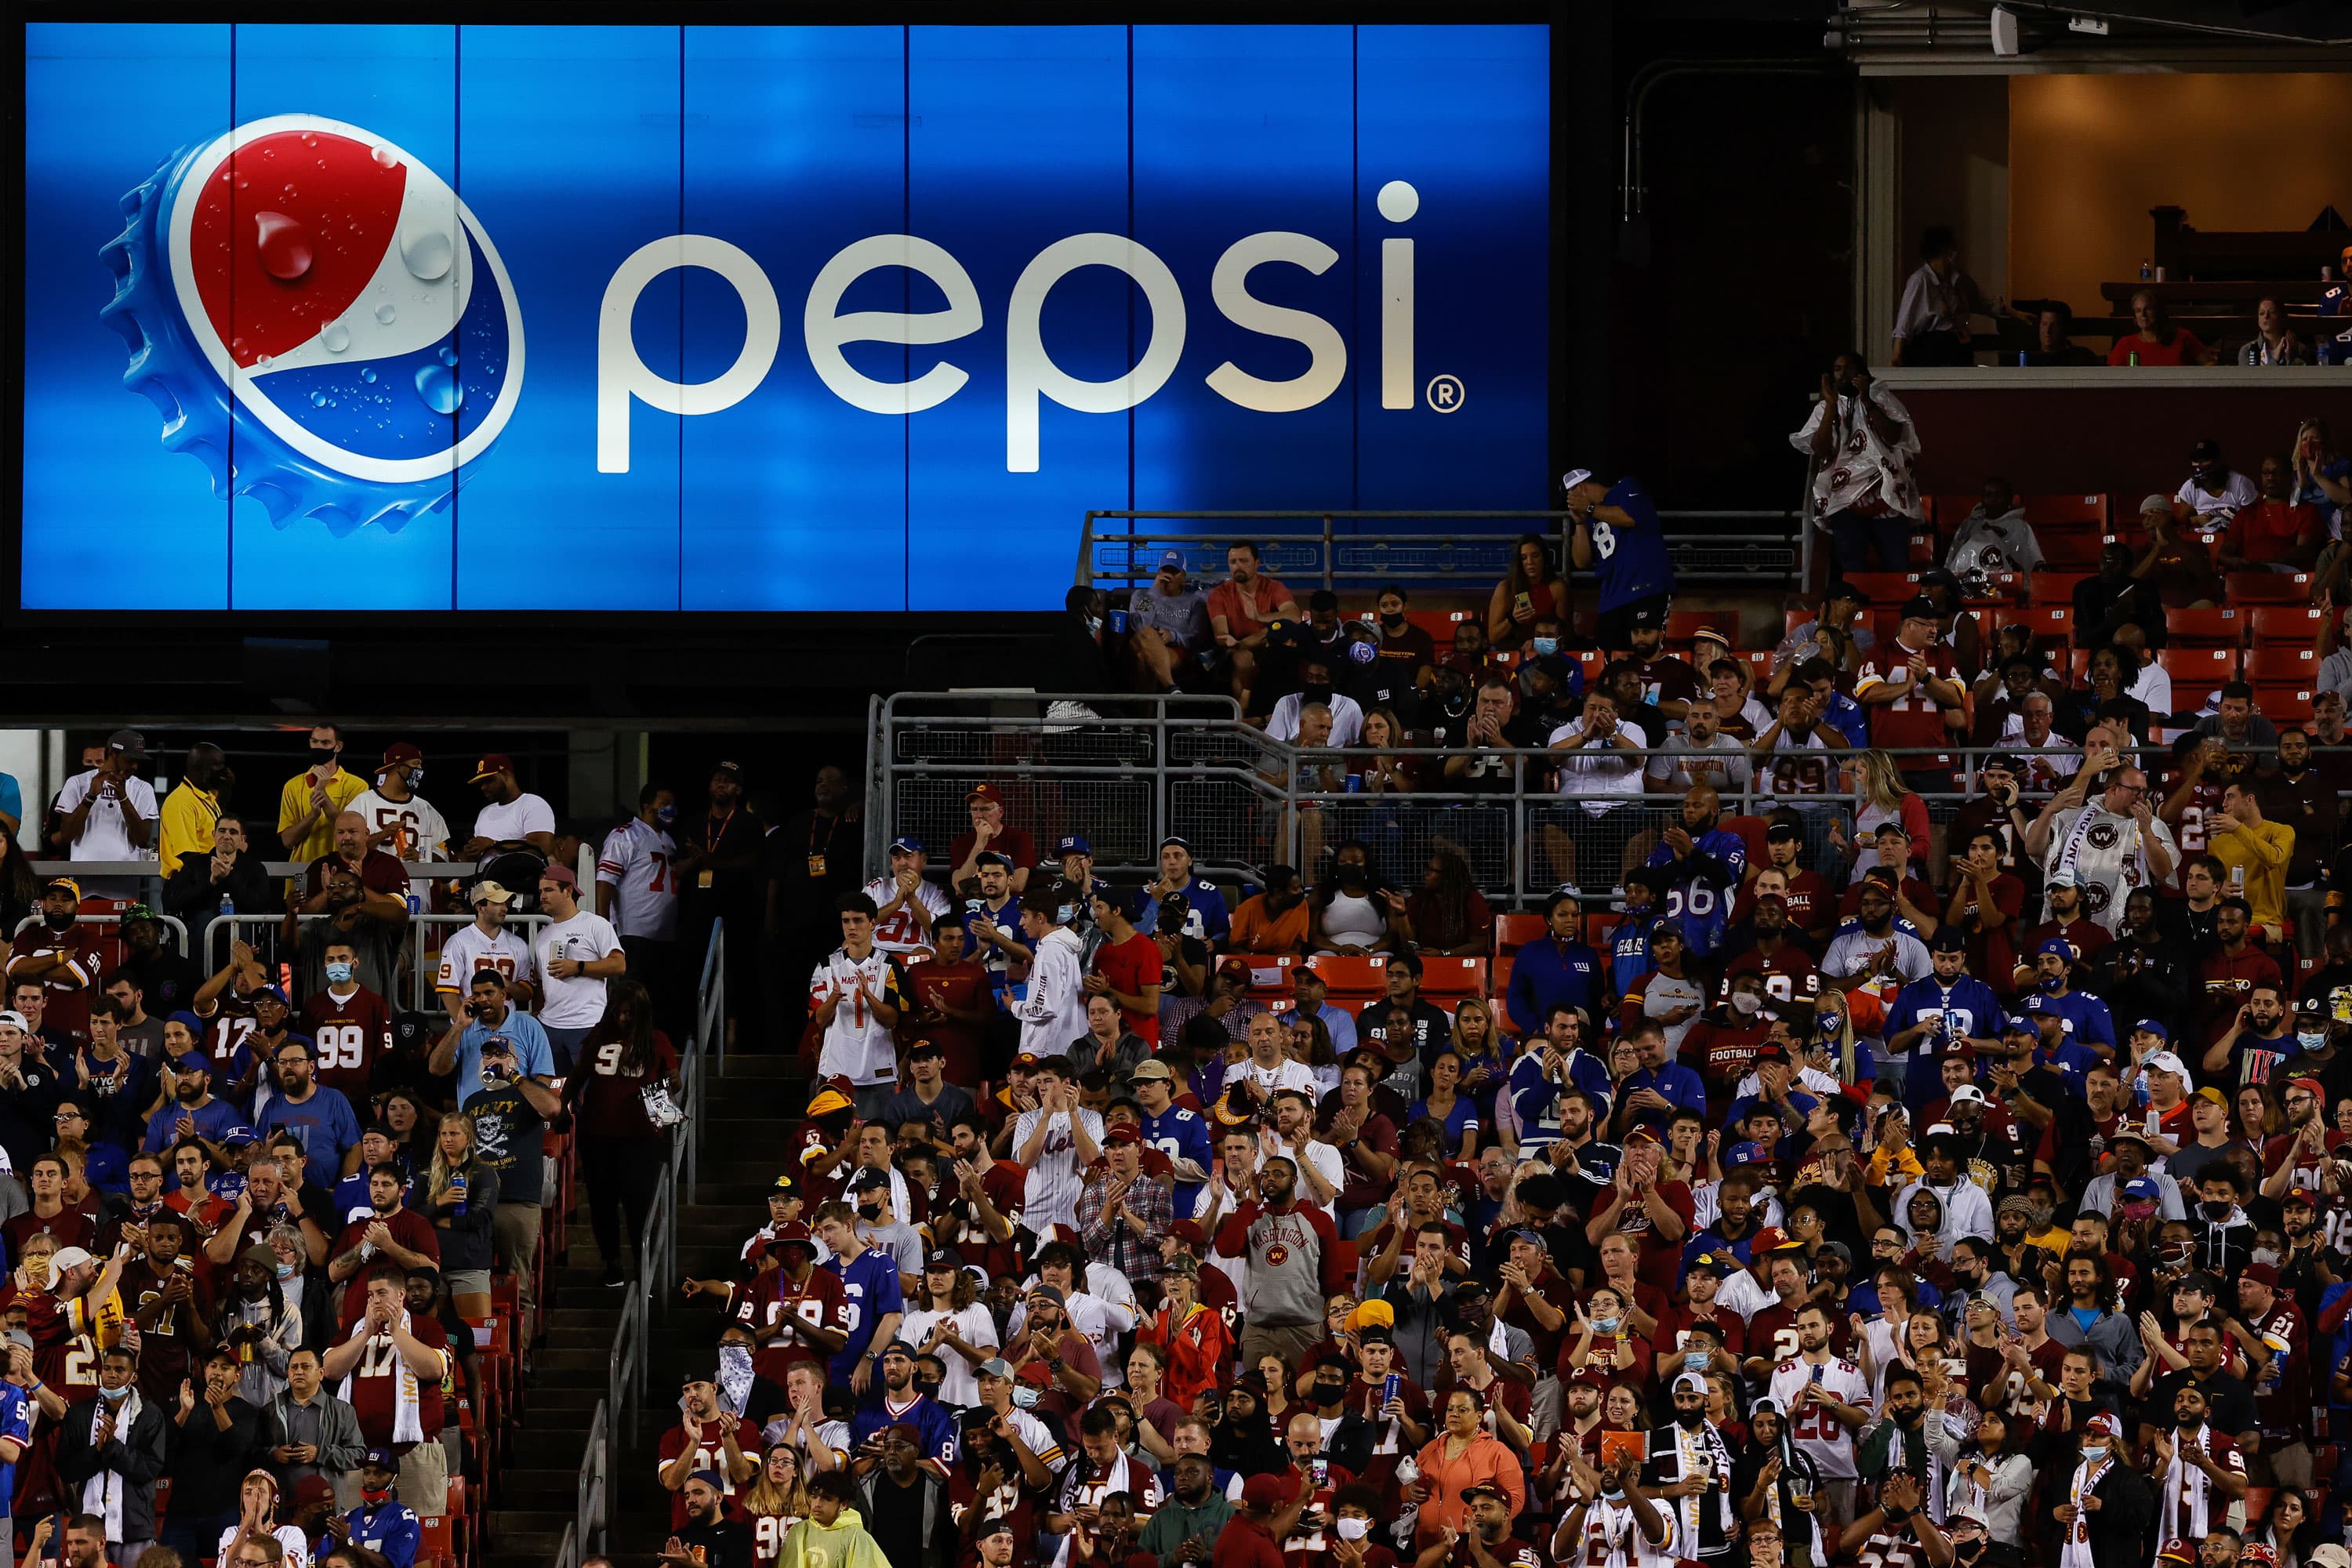 NFL renews sponsorship deal with Pepsi, but without Super Bowl halftime show